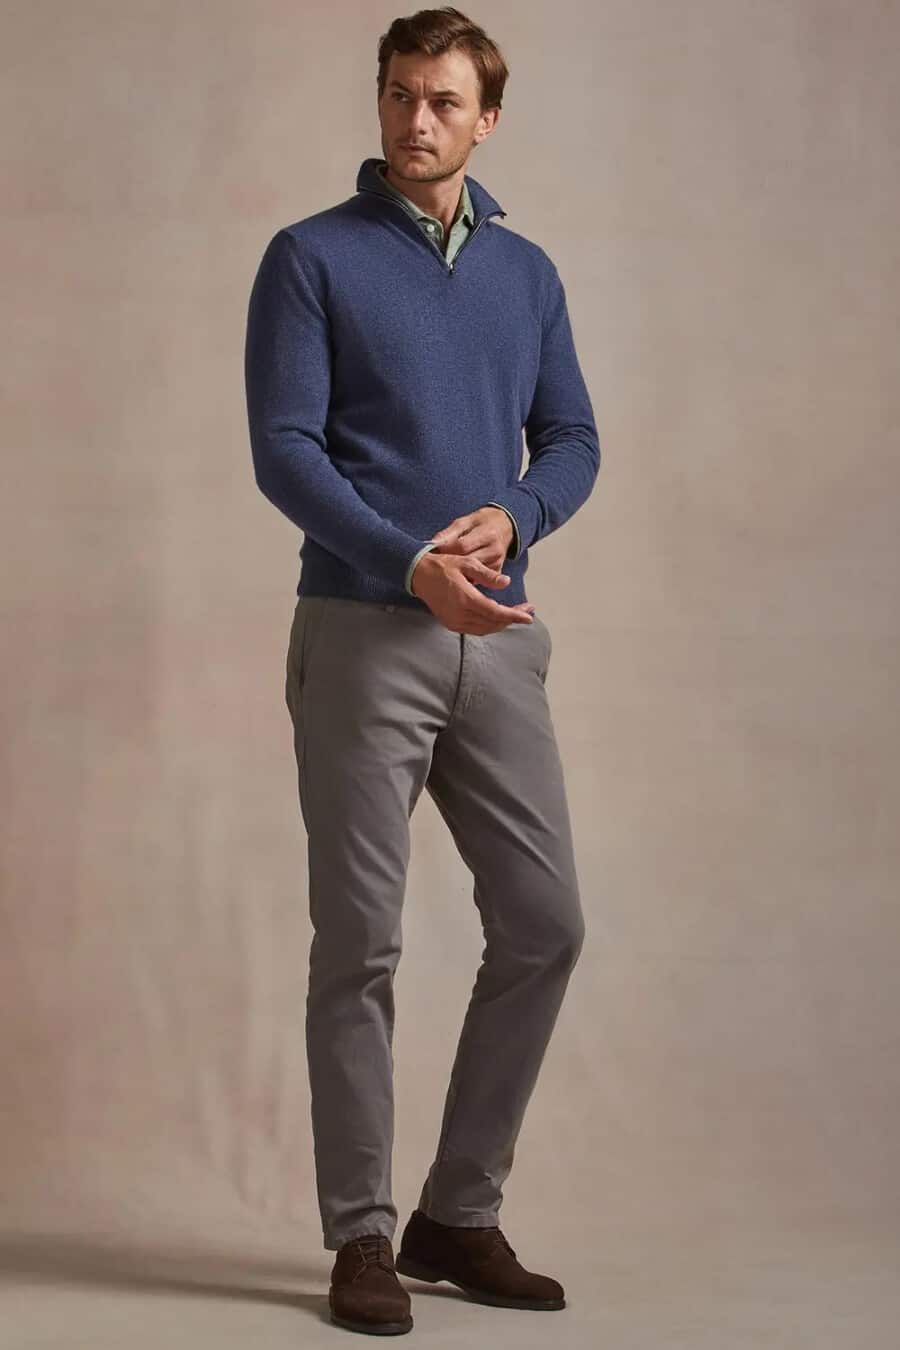 Men's grey chinos, green shirt, blue zip neck sweater and brown suede Derby shoes outfit